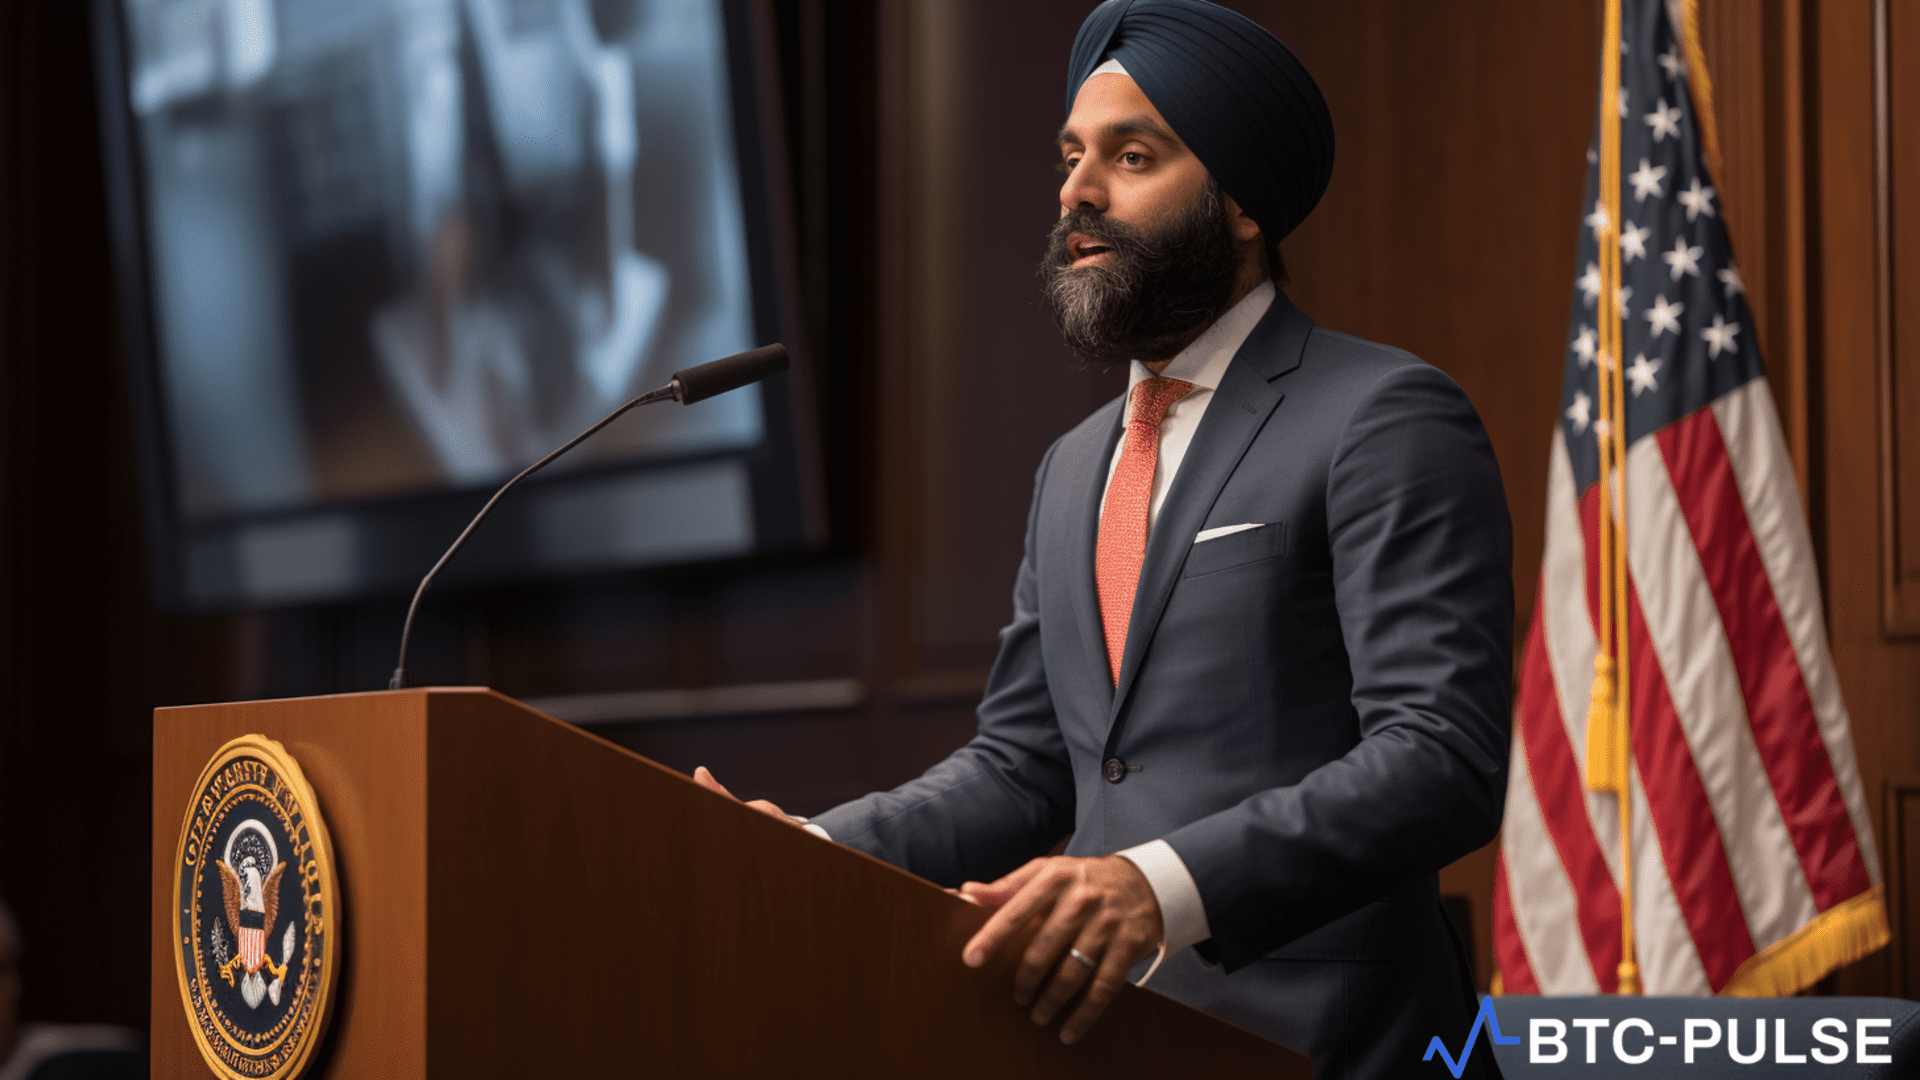 SEC Director of Enforcement Gurbir Grewal discussing the cryptocurrency industry's regulatory compliance challenges during the SEC Speaks event